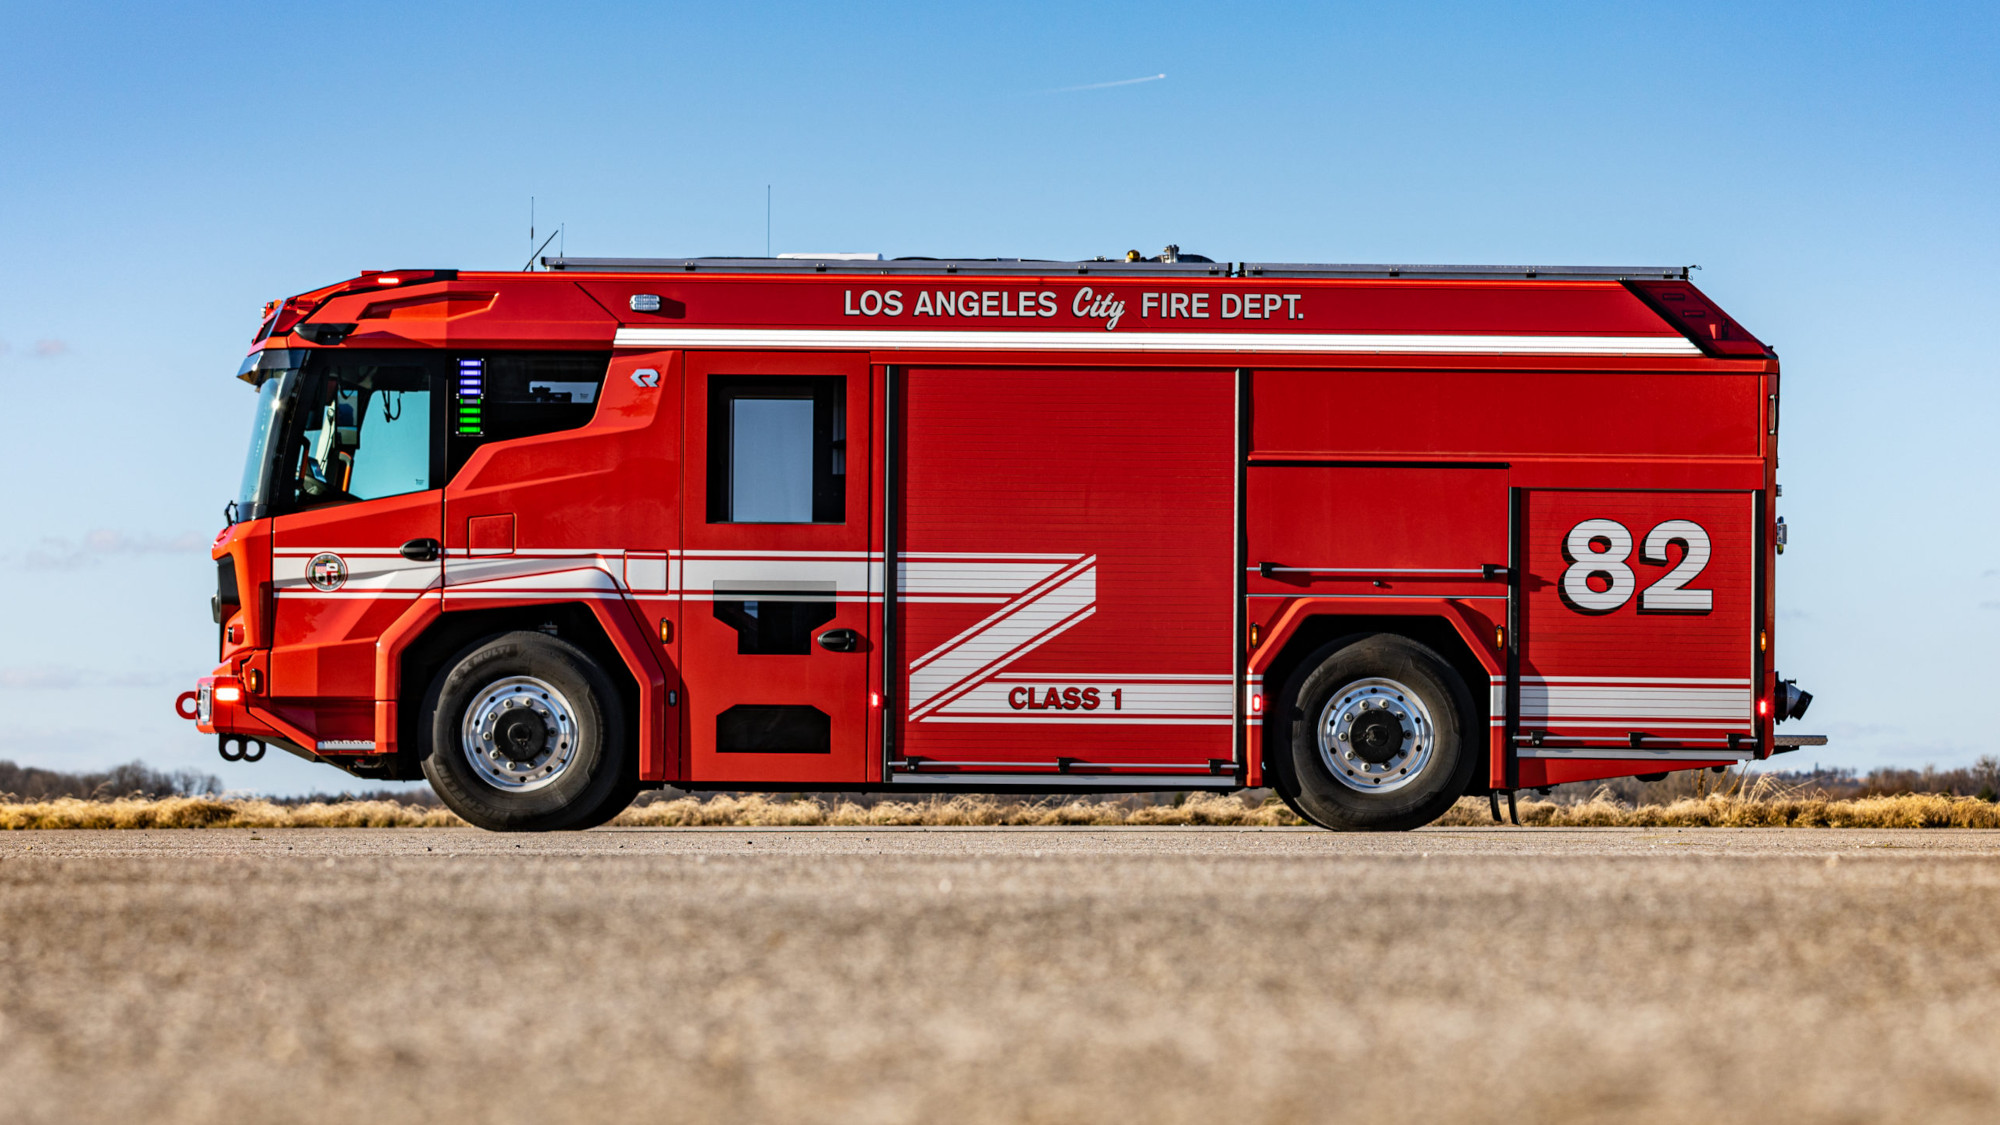 THE FIRST MASSPRODUCED ELECTRIC VEHICLE DEDICATED TO FIREFIGHTING